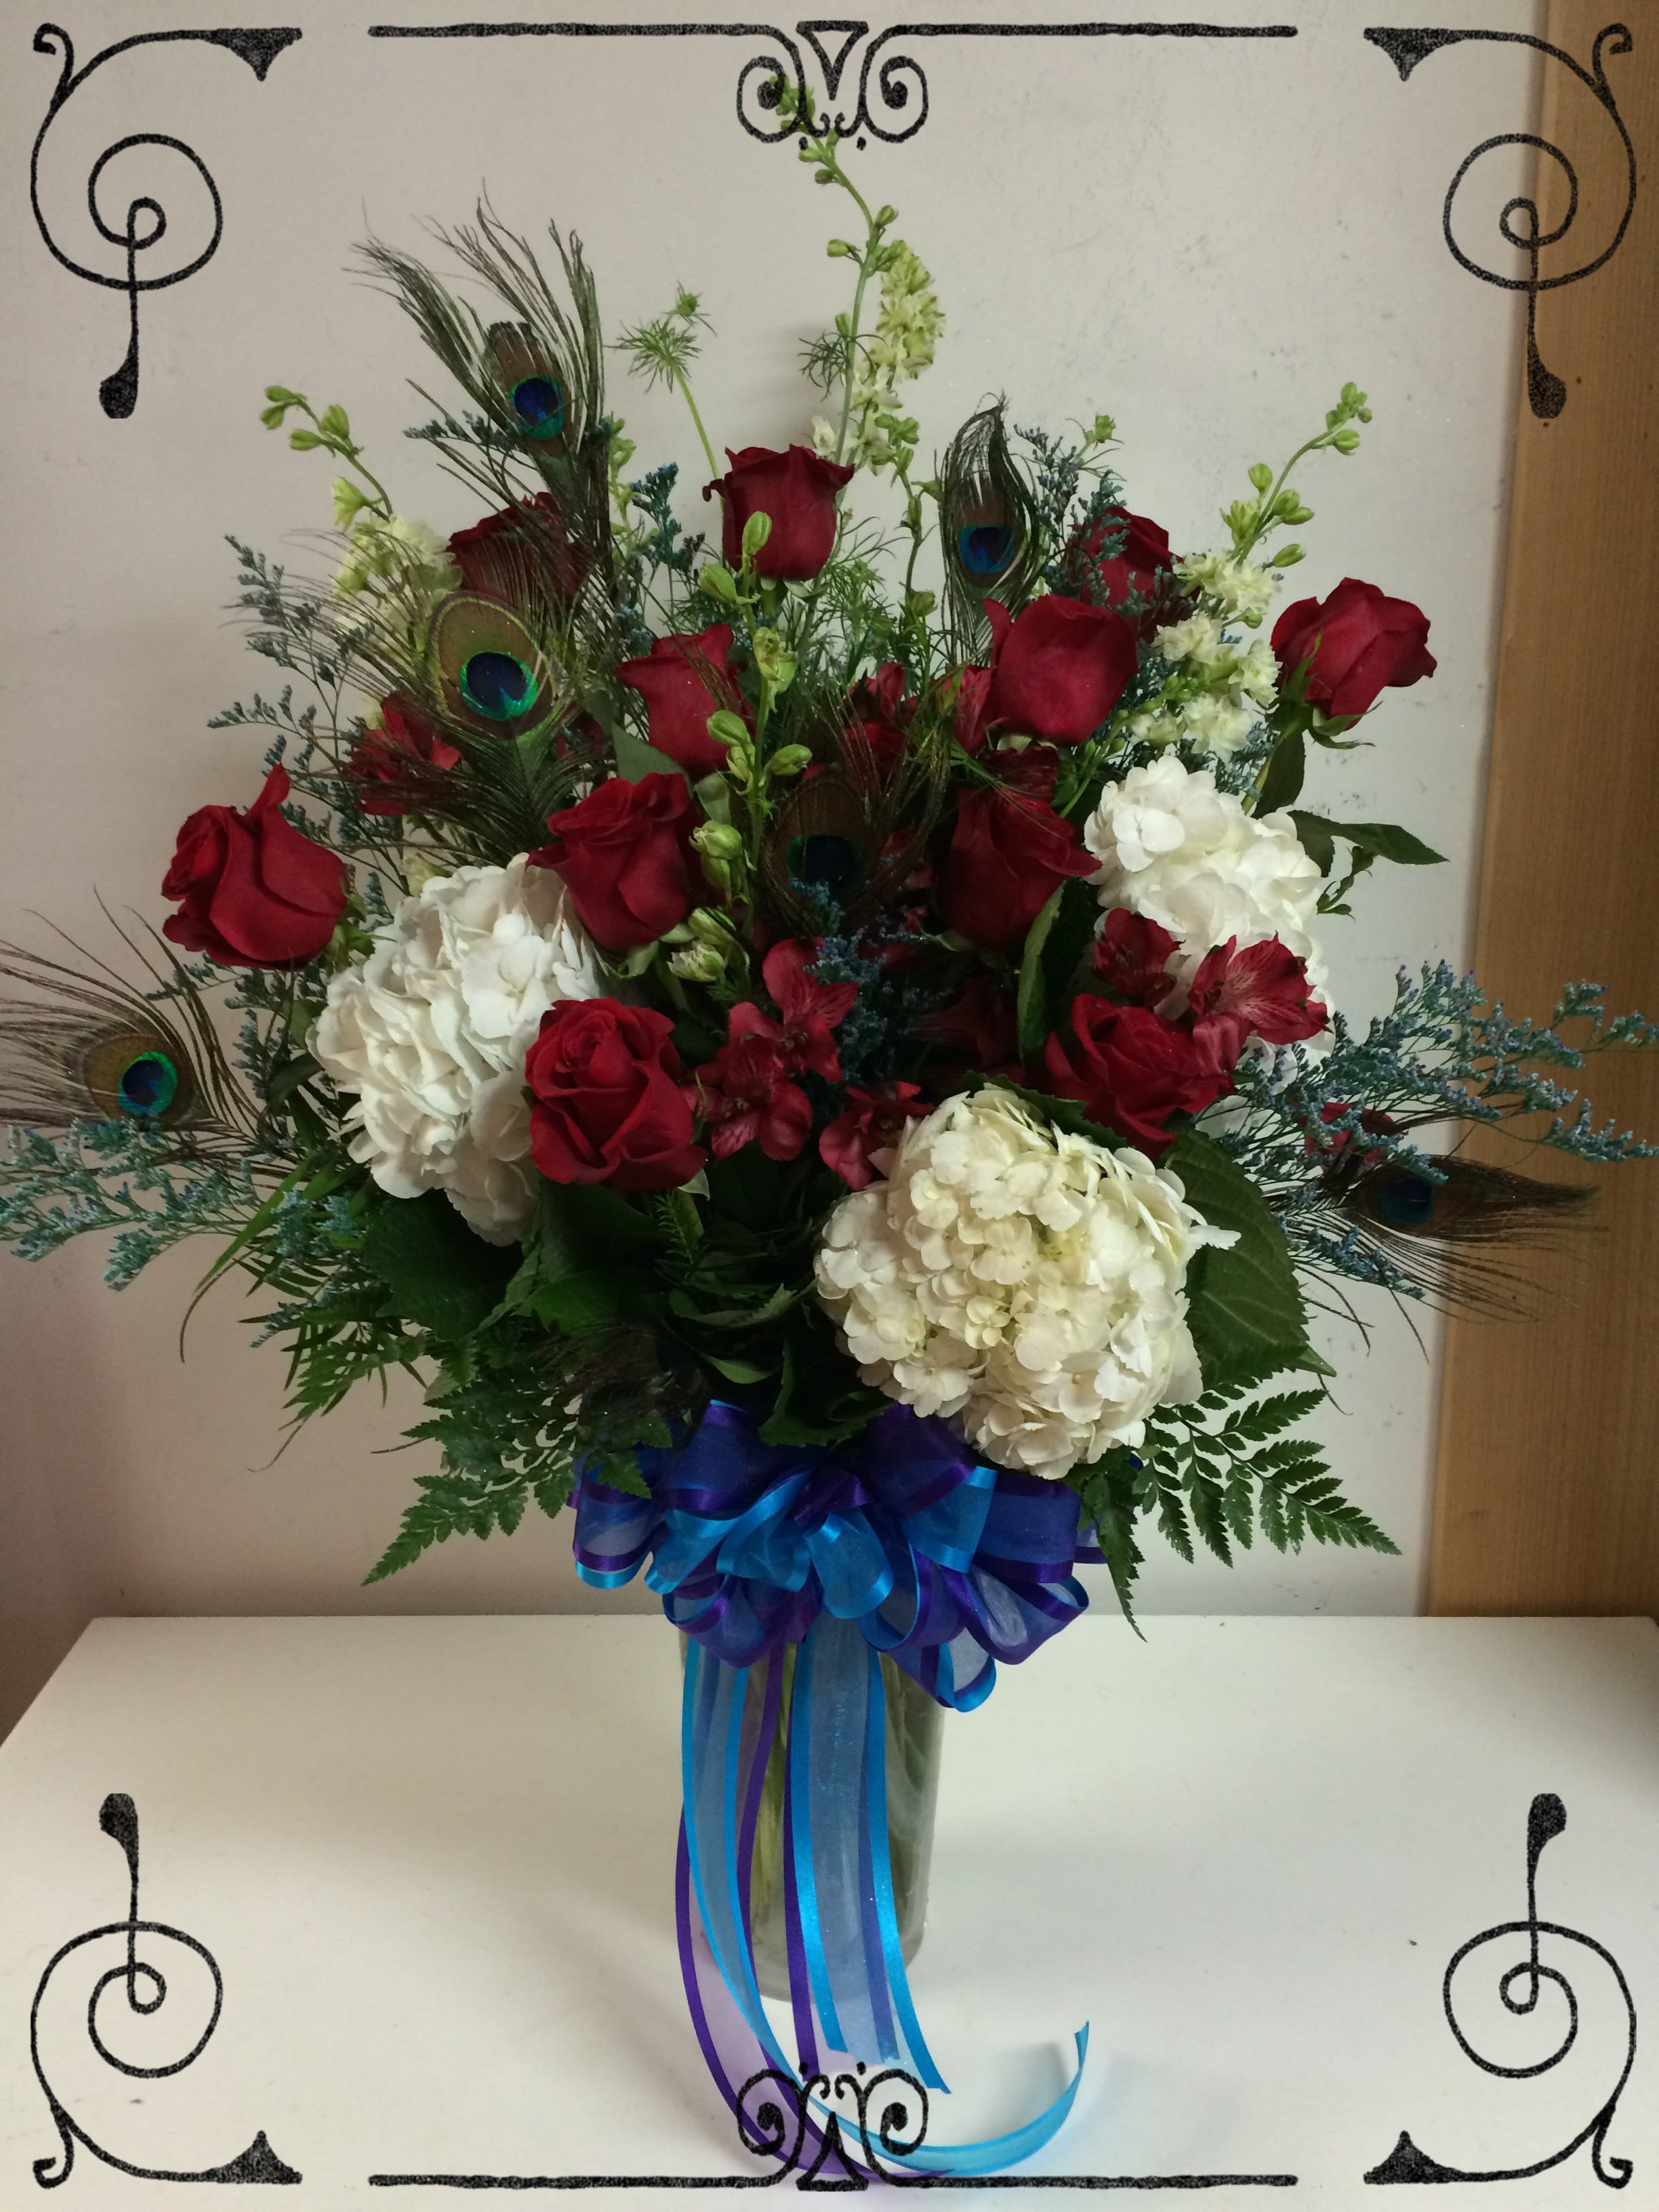 Peacock Roses &amp; Hydrangeas - A dozen red roses and 3 white hydrangeas in a tall clear glass vase with peacock feather accents